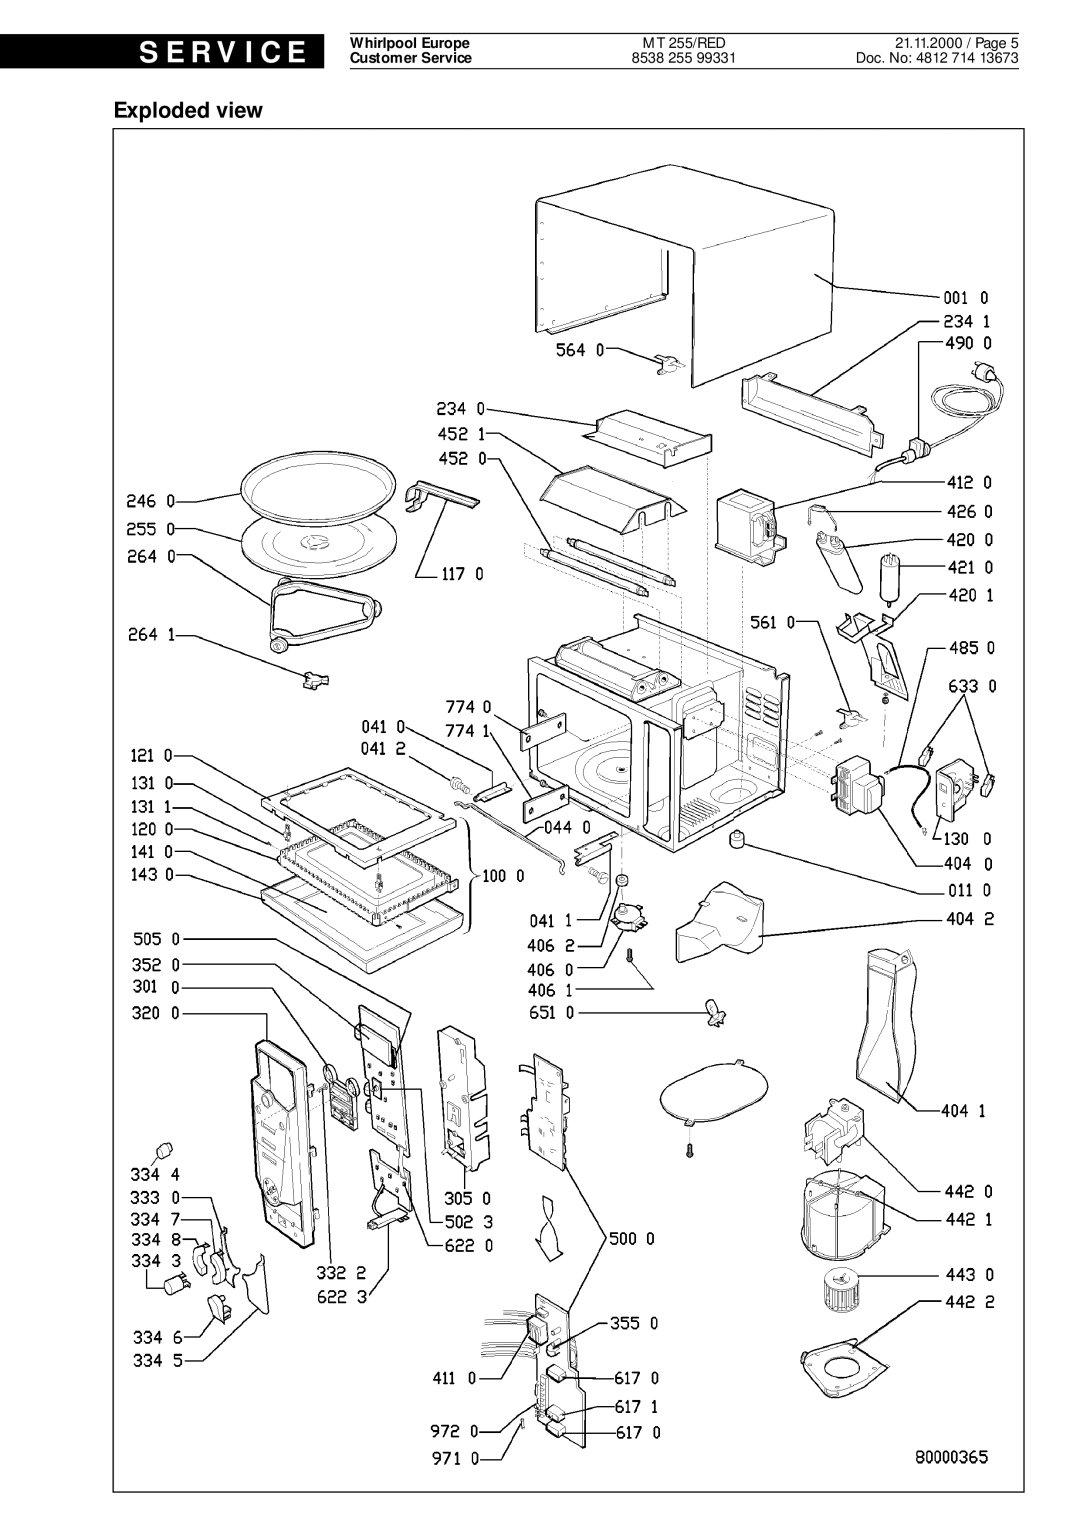 Whirlpool service manual Exploded view, S E R V I C E, MT 255/RED, 21.11.2000 / Page, 8538, Doc. No 